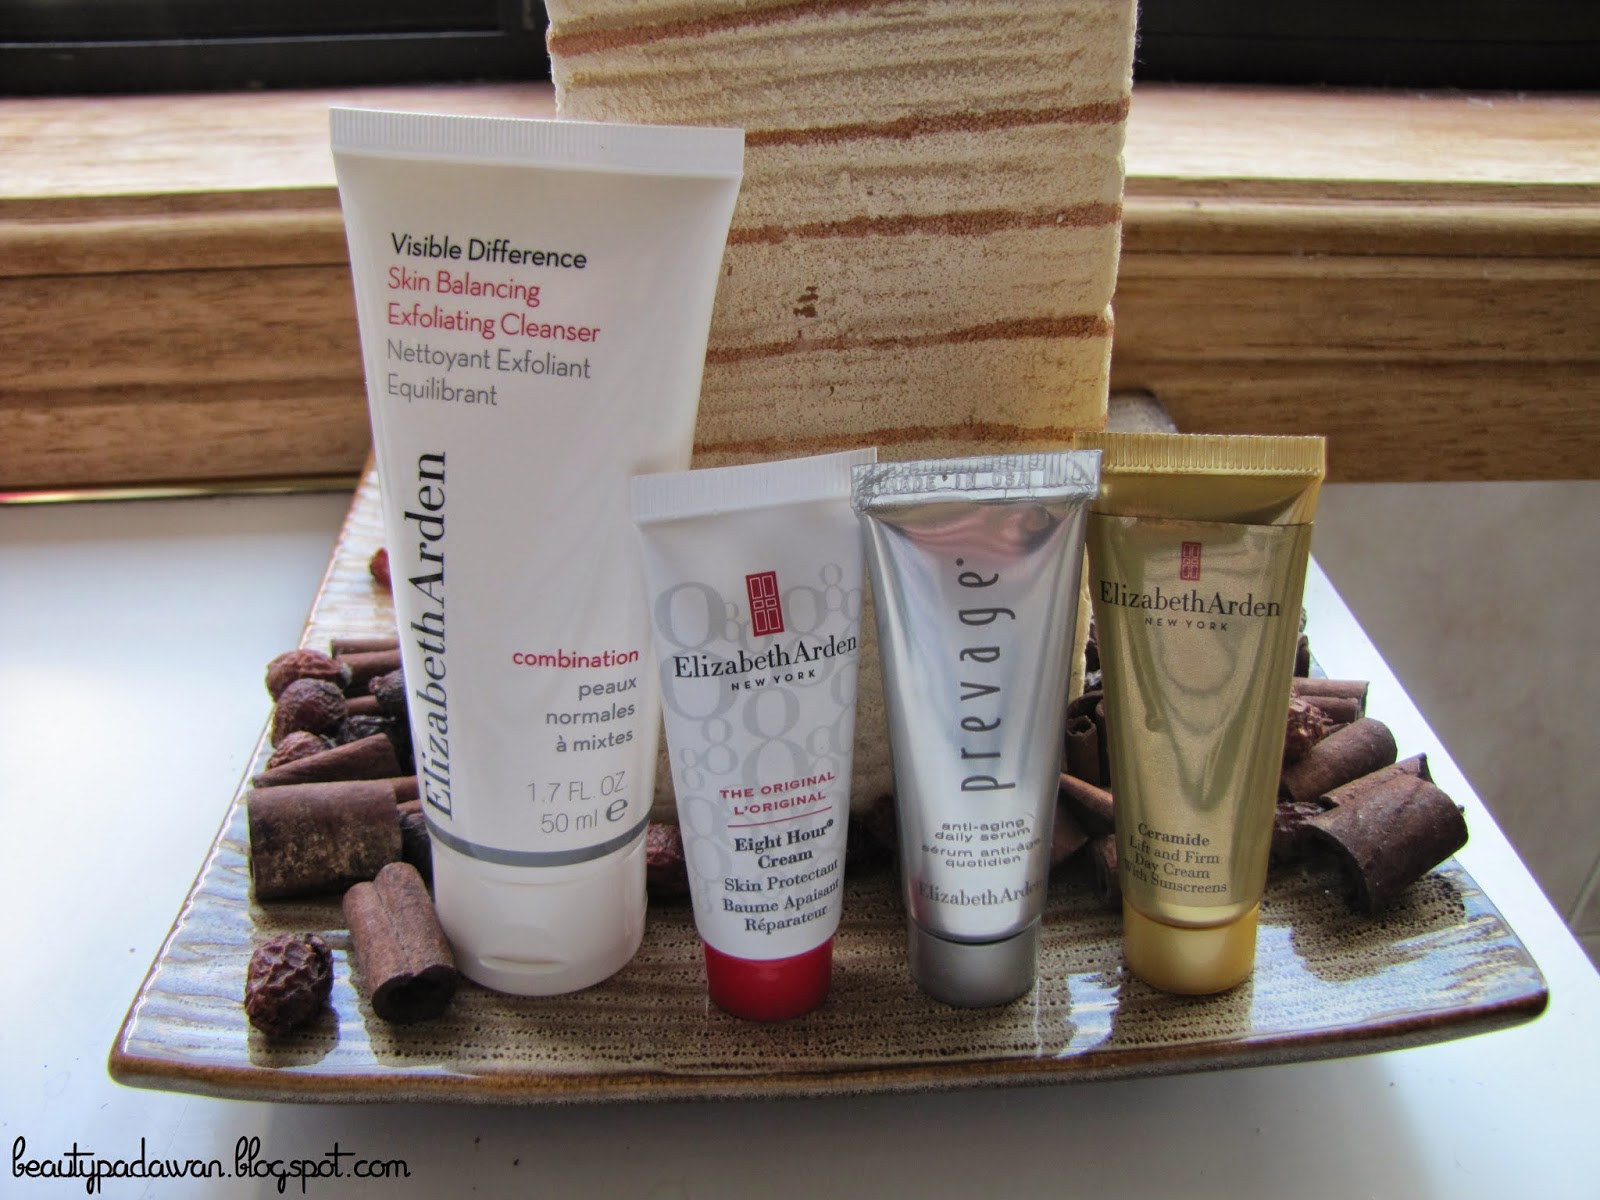 Elizabeth Arden Visible Difference Skin Balancing Exfoliating Cleanser; Elizabeth Arden The Original Eight Hour Cream Skin Protectant; Elizabeth Arden Prevage Anti-Aging Daily Serum; Elizabeth Arden Ceramide Lift and Firm Day Cream with Sunscreen